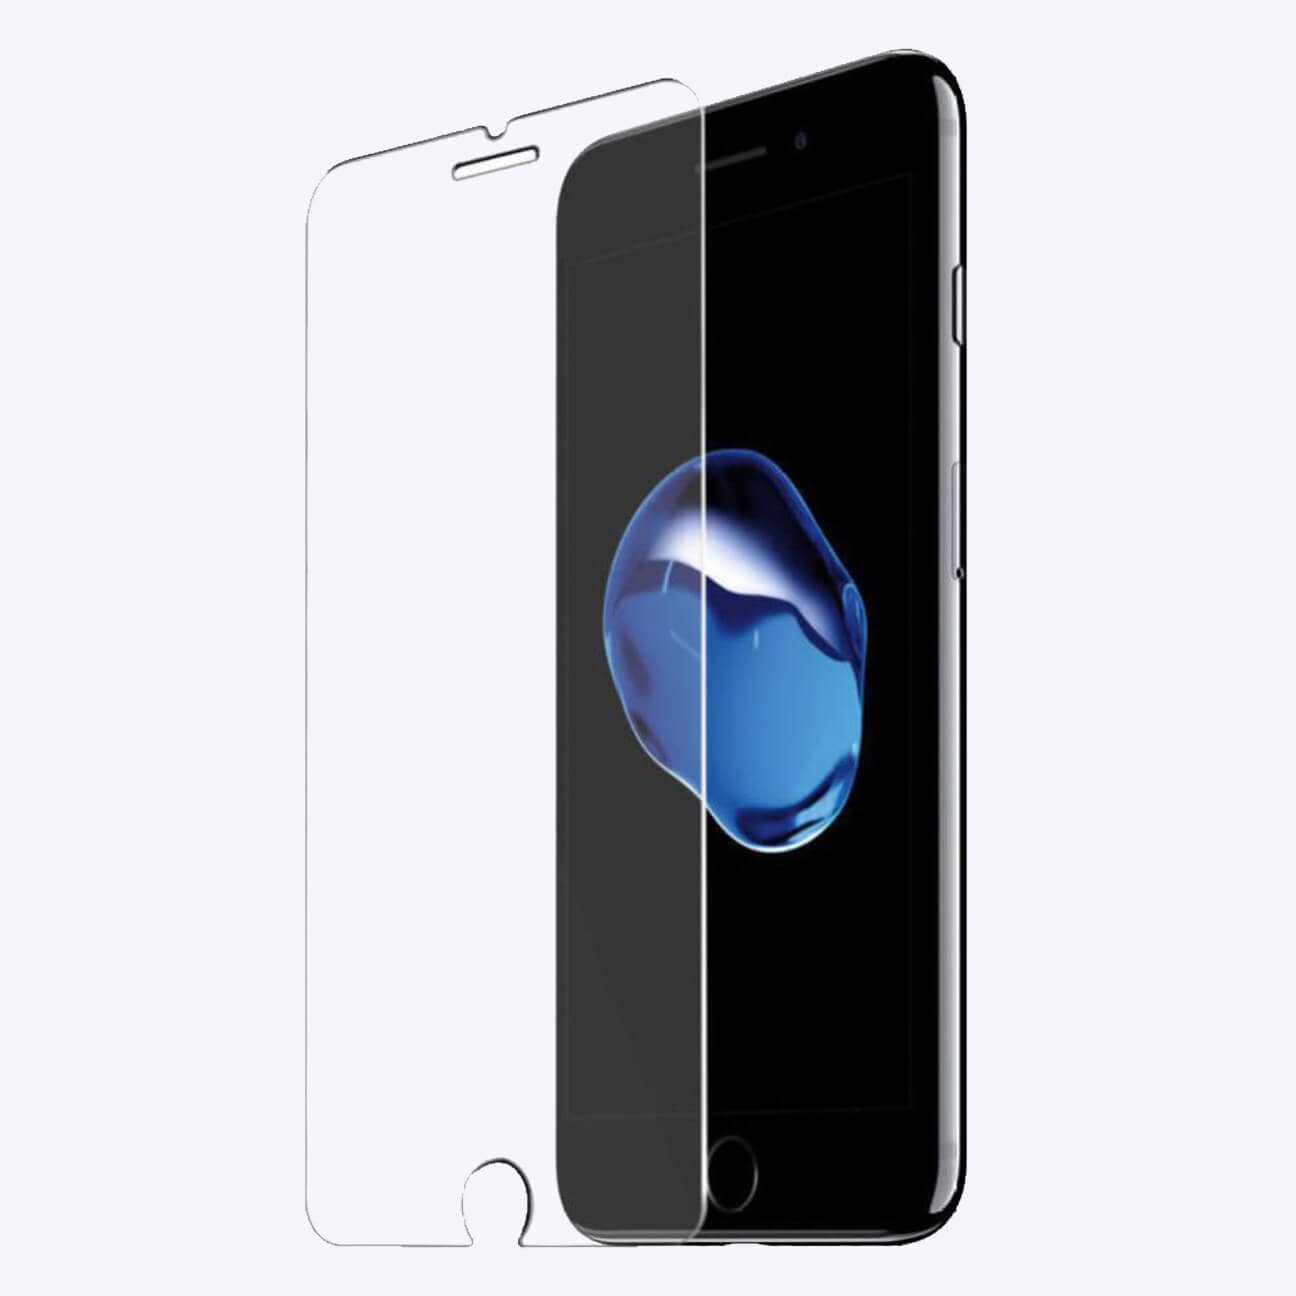 Samsung Galaxy J3 Pro Tempered Glass Screen Protector